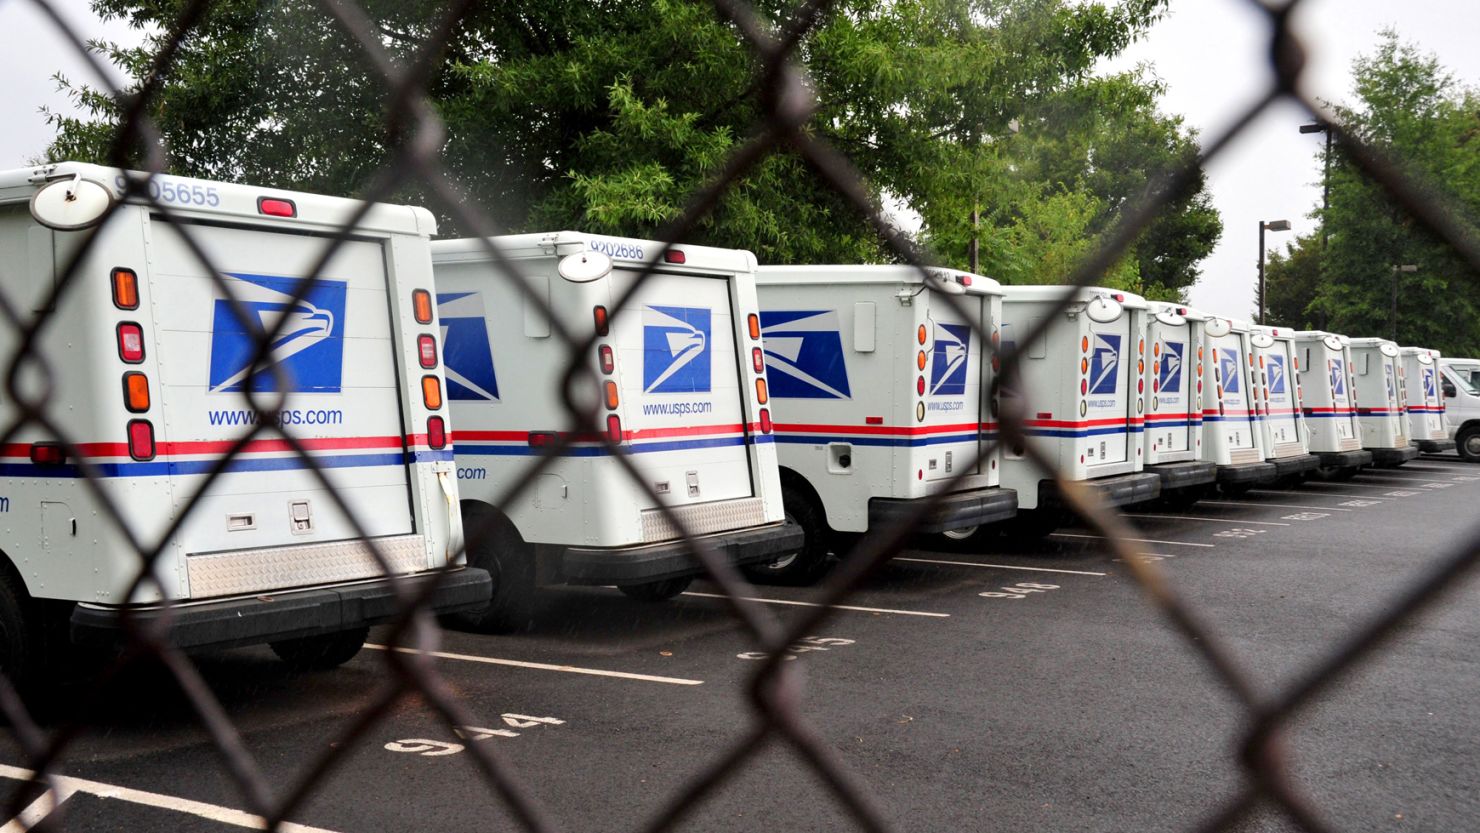 The U.S. Postal Service is considering scaling back services, including shifting to a 5-day delivery week.